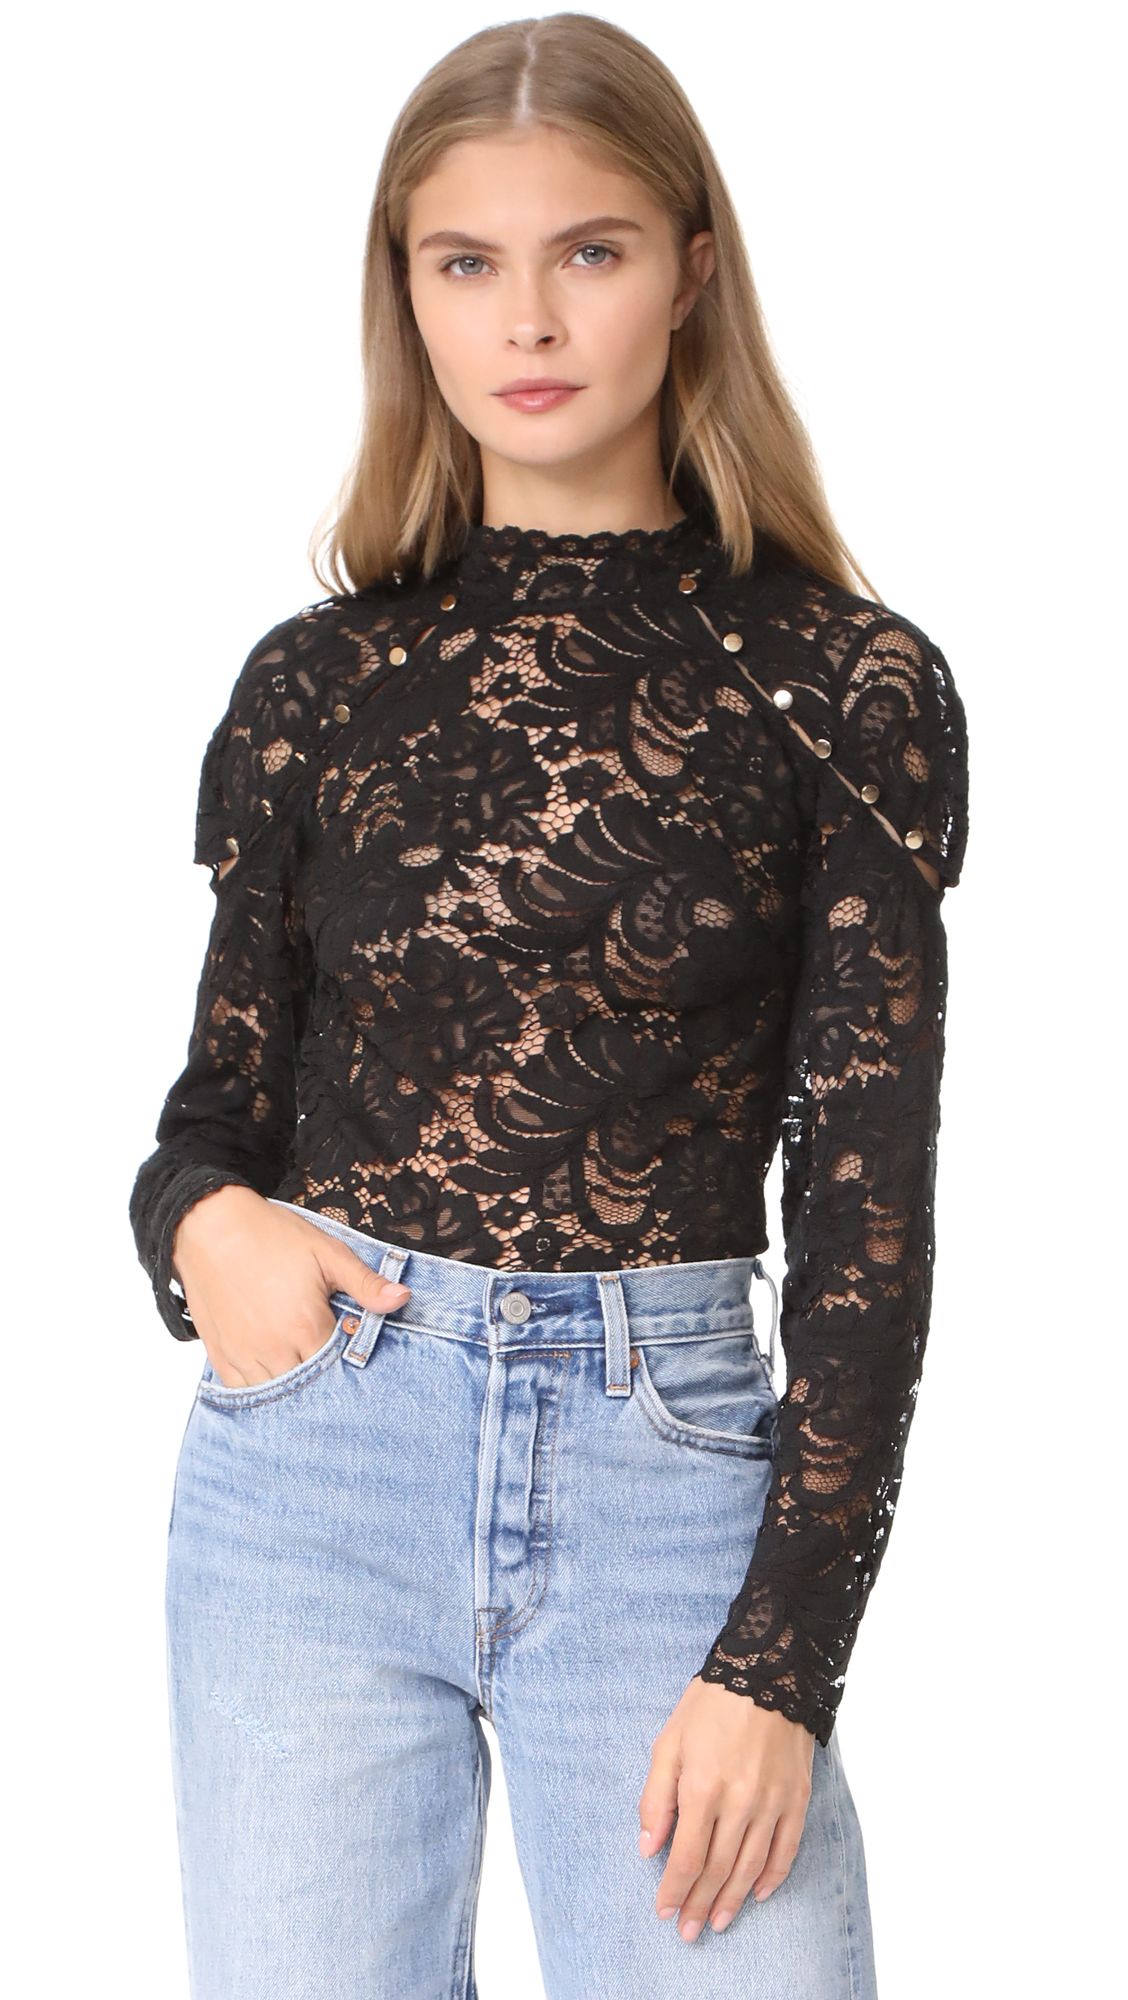 Star Crossed Lace Top | Shopbop